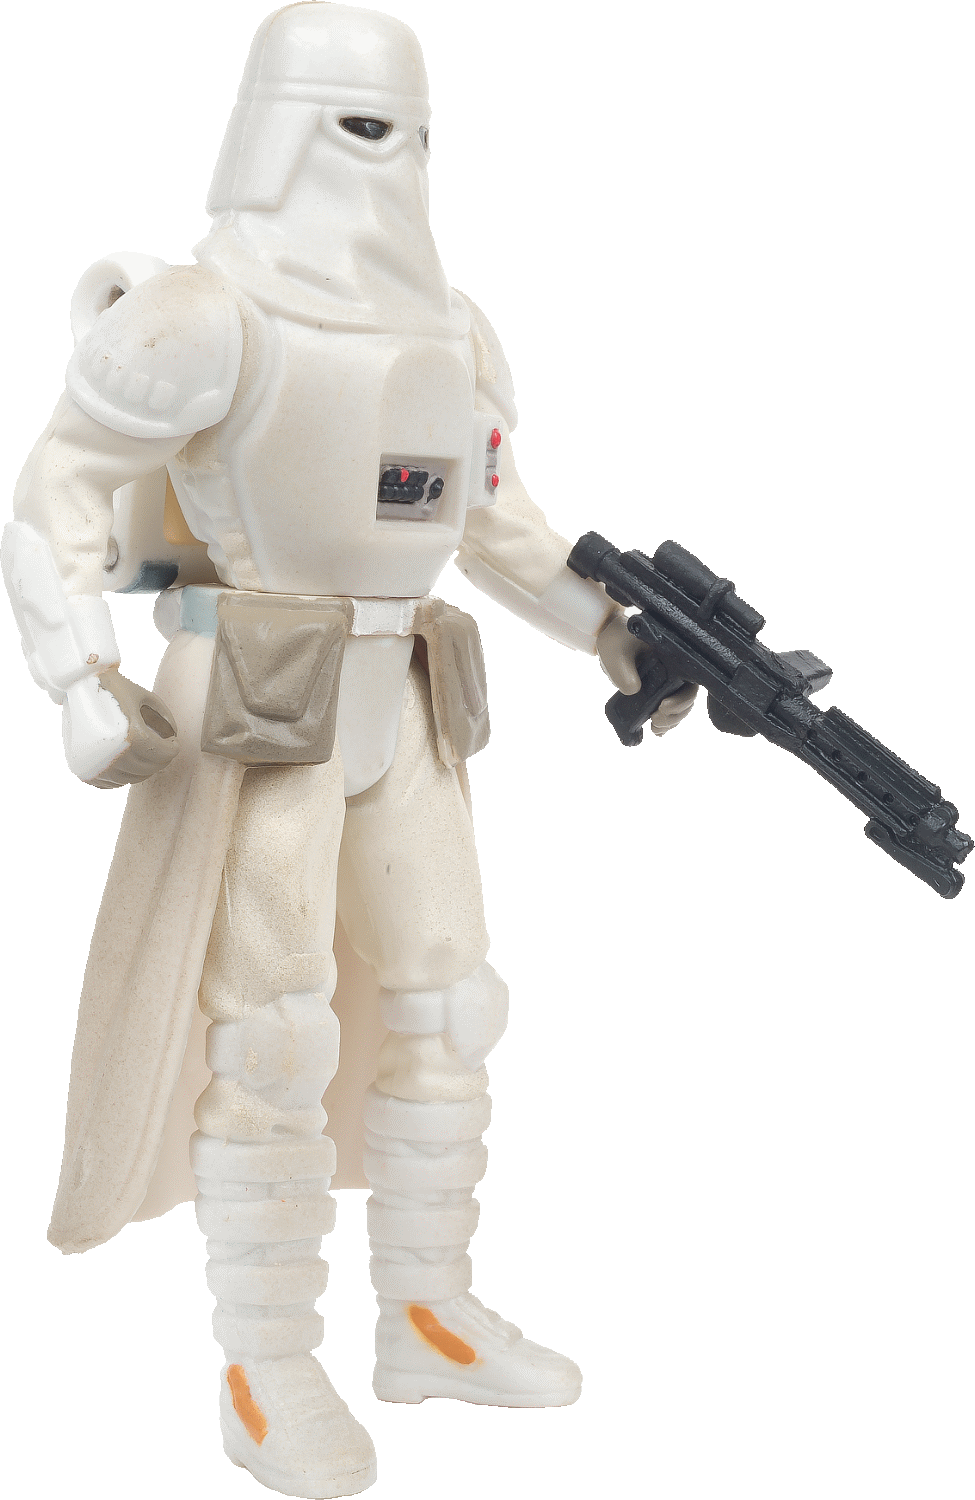 Snowtrooper With Imperial Blaster Rifle 69632 Star Wars Merchandise